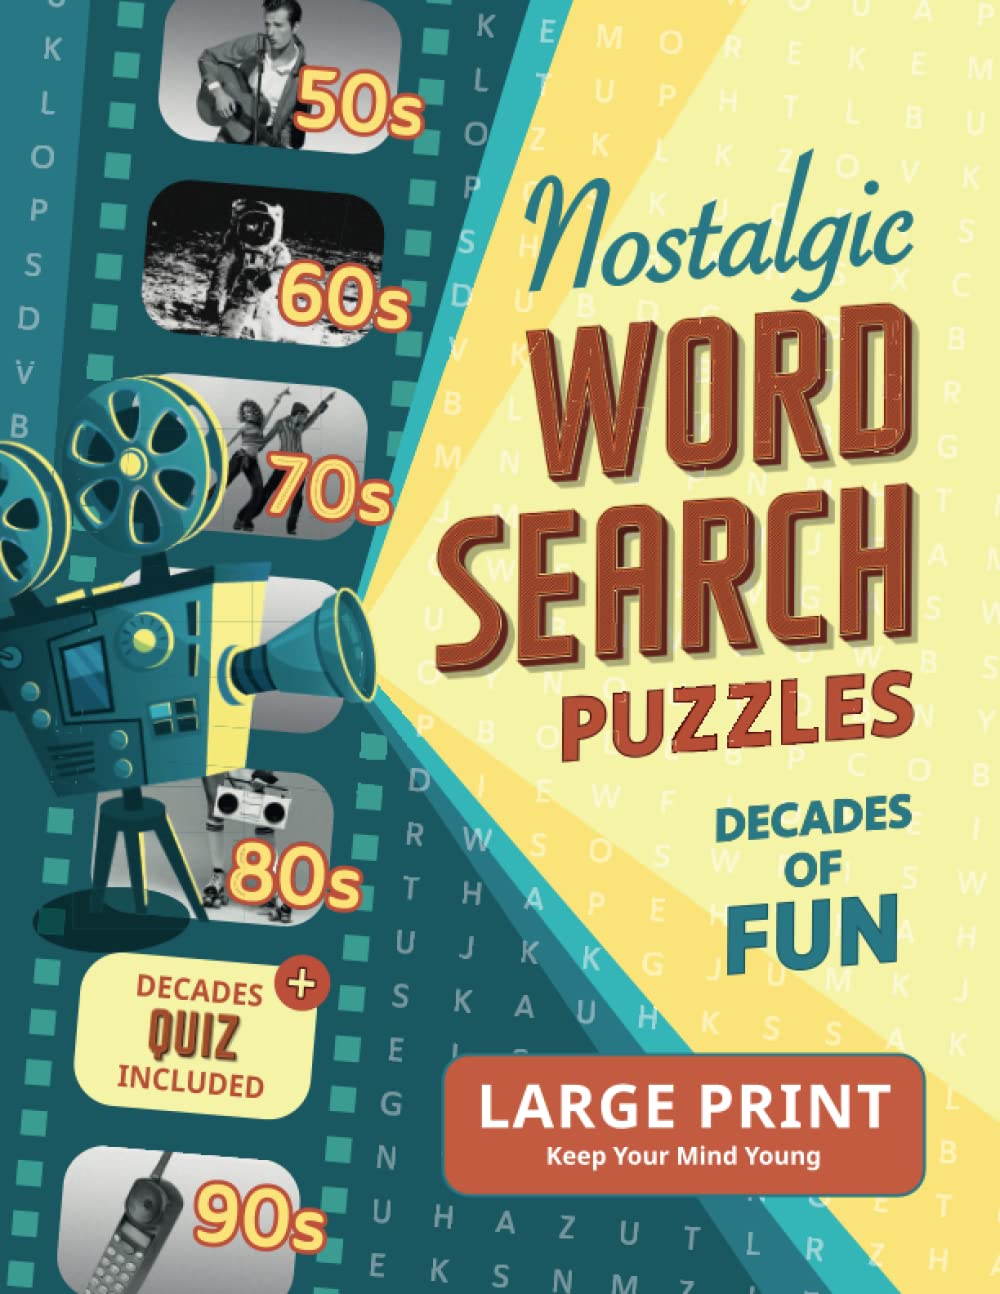 Nostalgic Word Search Puzzles: Puzzle Your Way Through the Decades with Funny Wordfind Puzzle Games From the 50s-90s for Seniors and Adults [Large Print Incl. Decades Quiz]